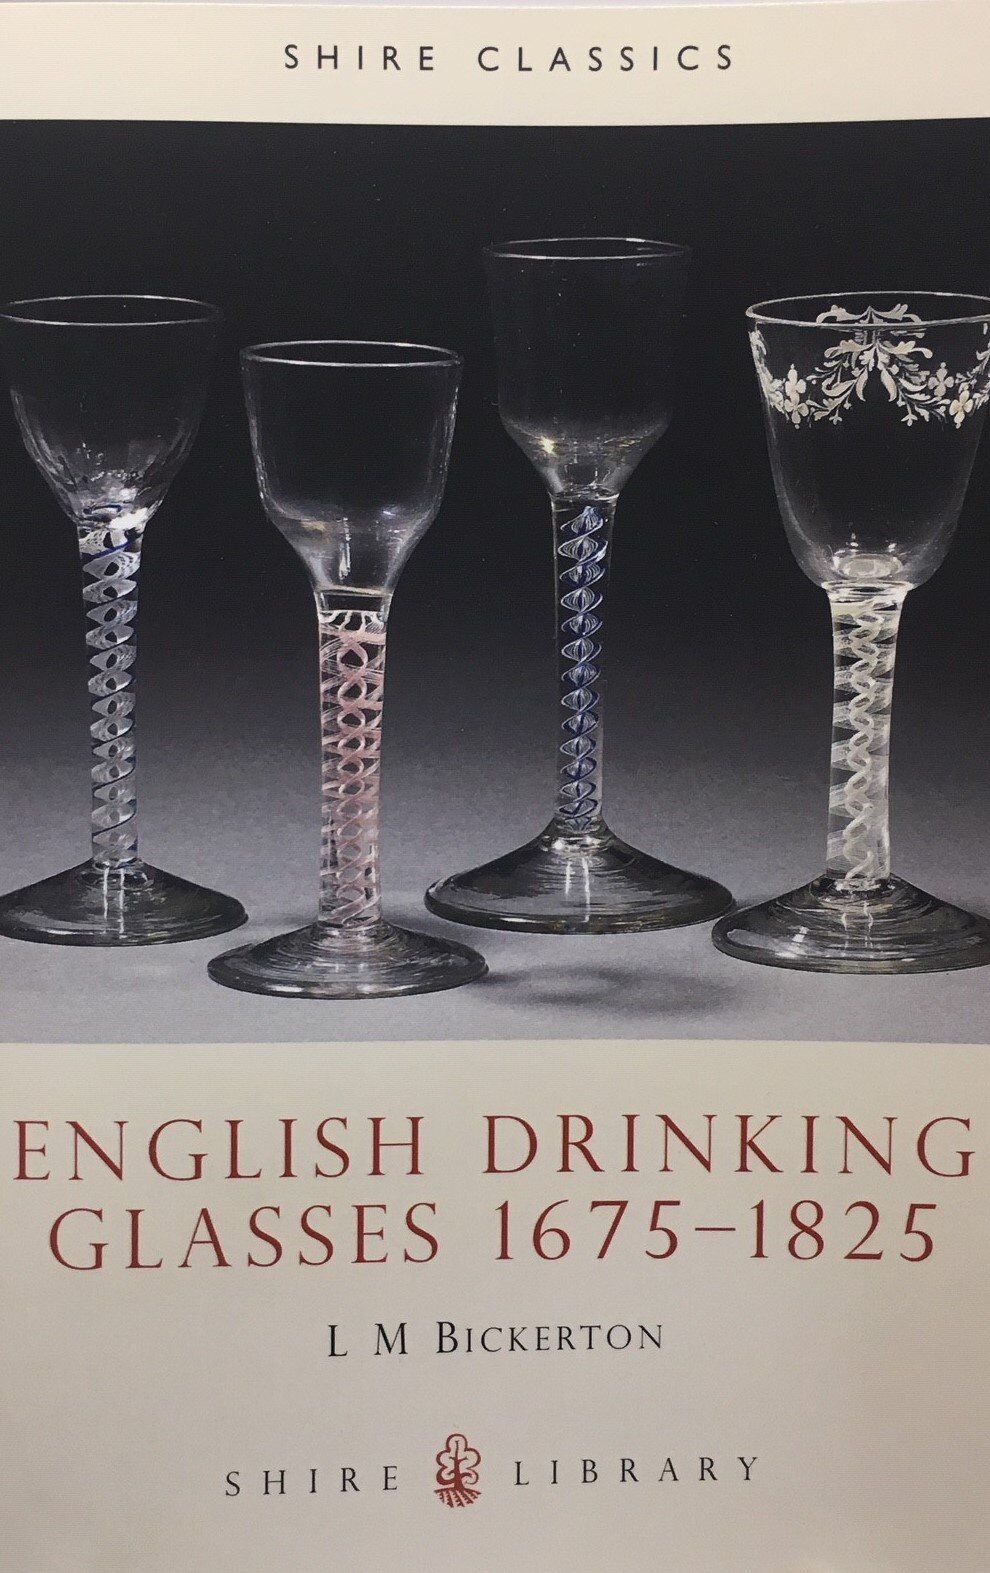 Shire Book: English Drinking Glasses 1675-1825